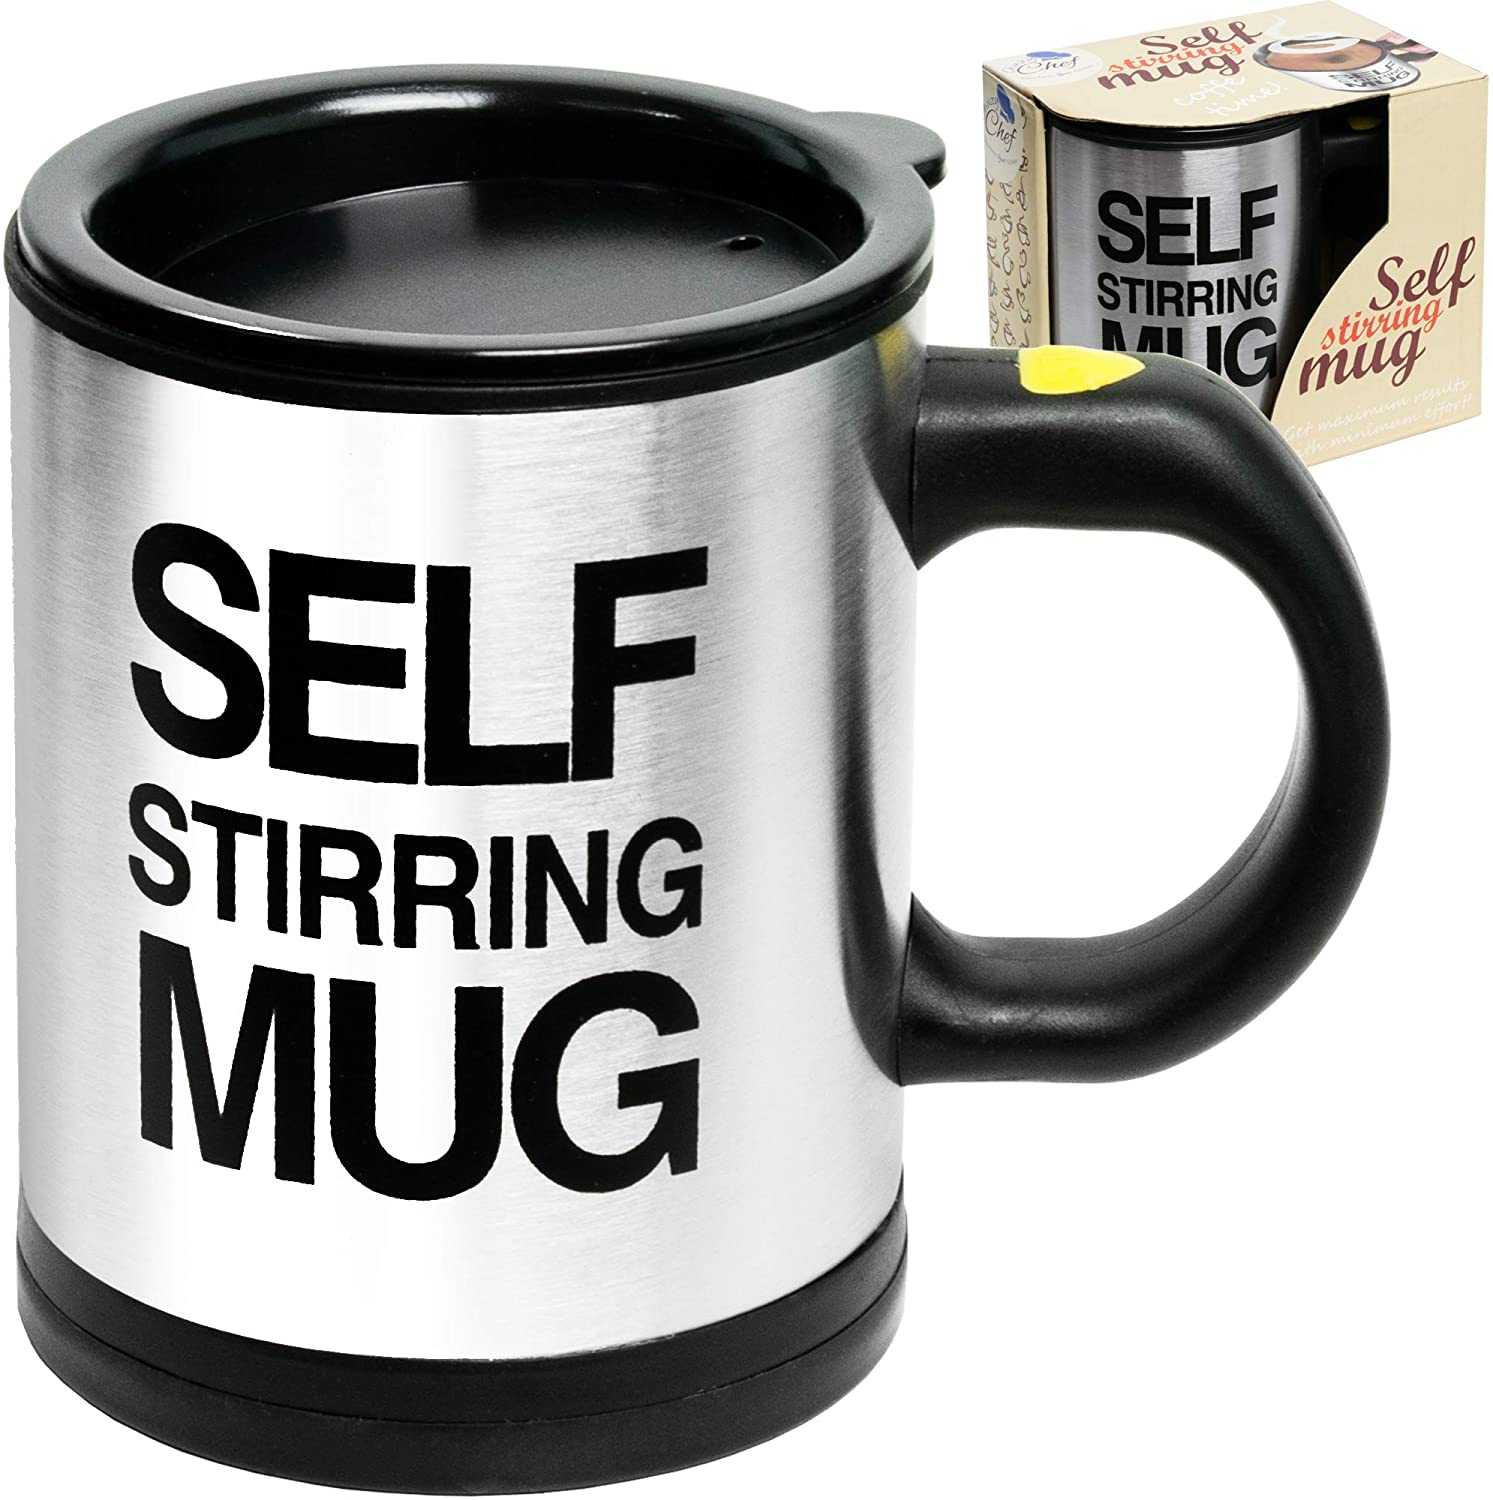 Security Guard FUELLED BY Mug Coffee Tea Latte Gift Idea novelty office 